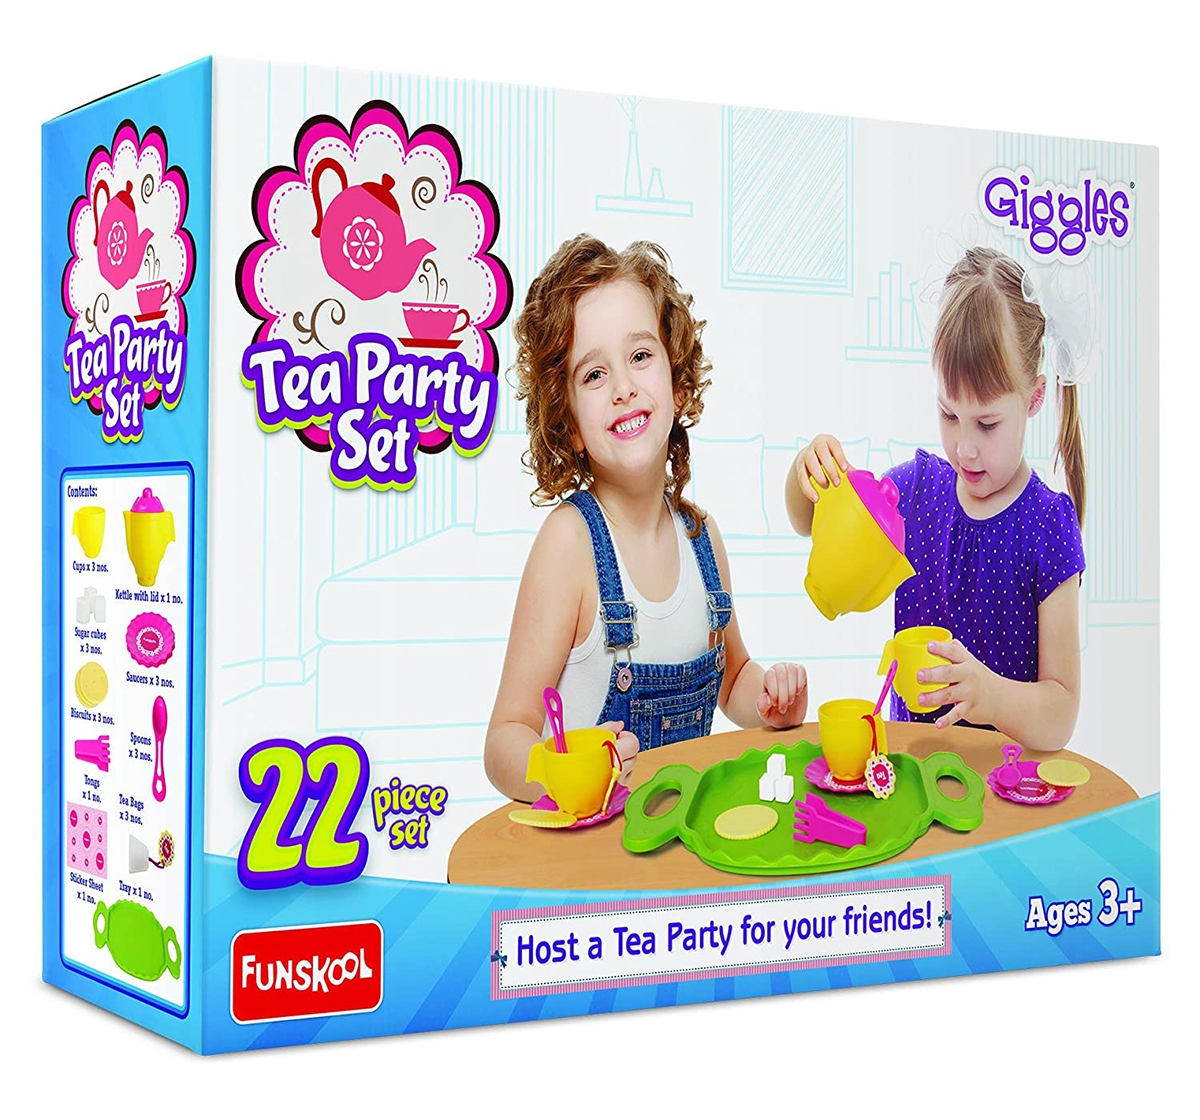 Giggles | Giggles Tea Party Kitchen Sets & Appliances for Girls age 3Y+ 